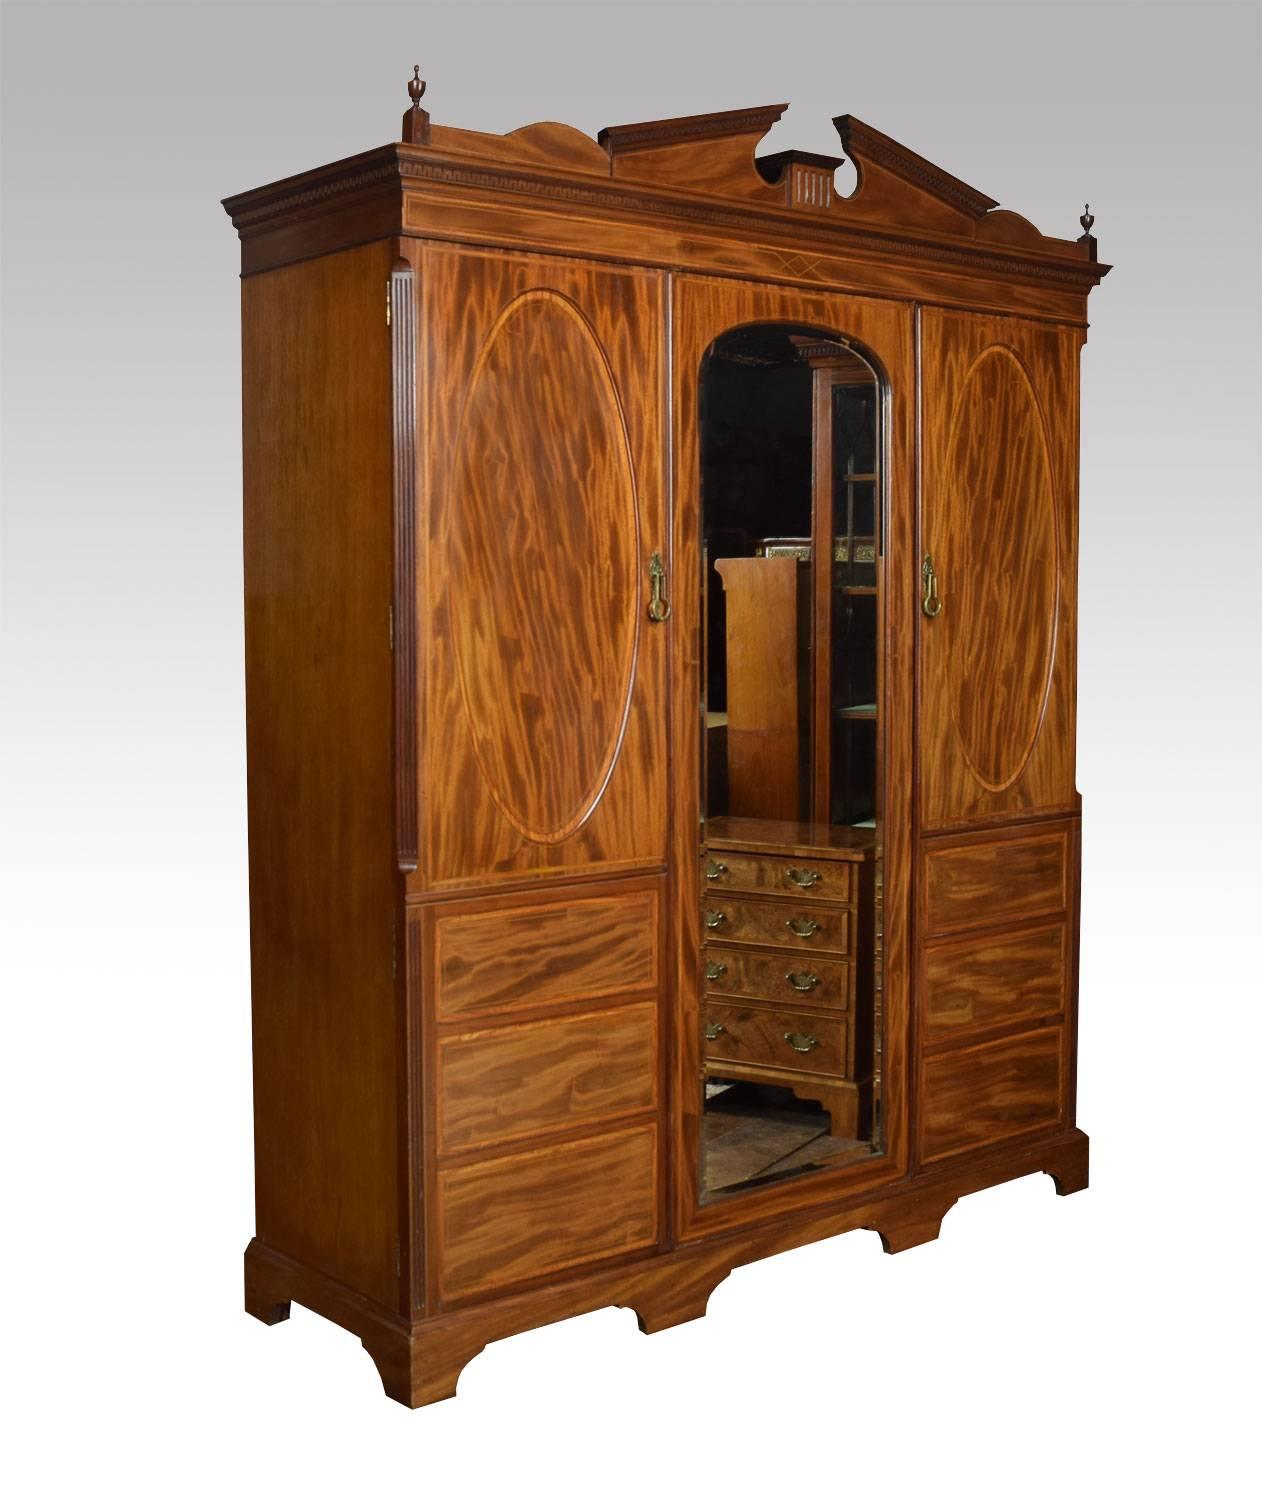 Figured mahogany three-door wardrobe the architectural cornice, flanked by urn finials above three large mahogany doors. The centre door with original full length mirror plate, surrounded with well figured oval panelled side doors having canted